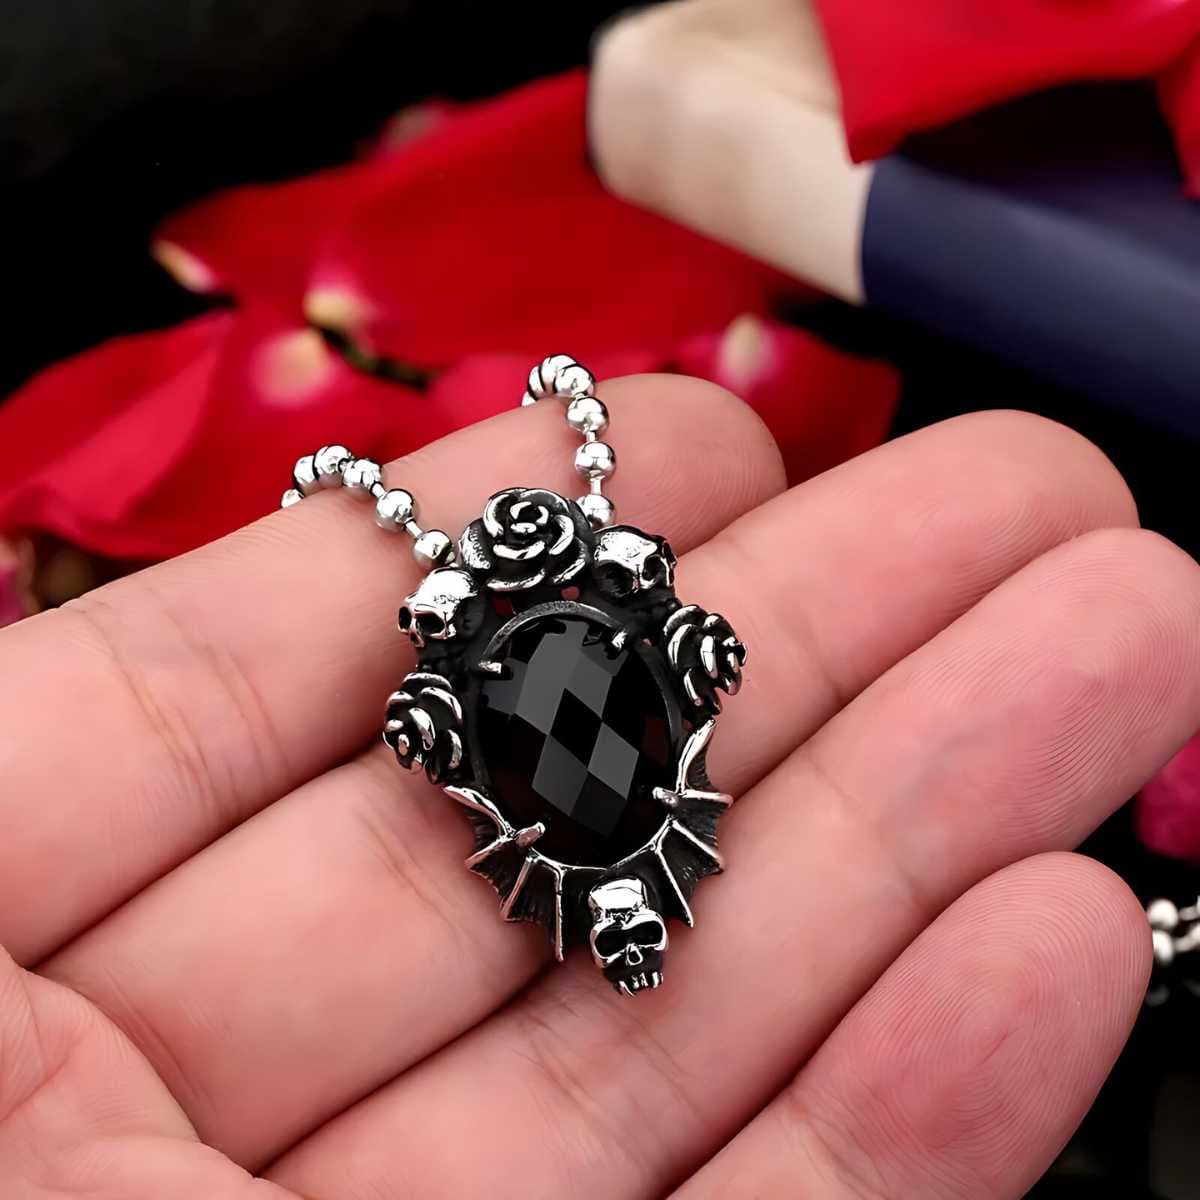 Stainless Steel Gothic Rose Necklace Xenos Jewelry